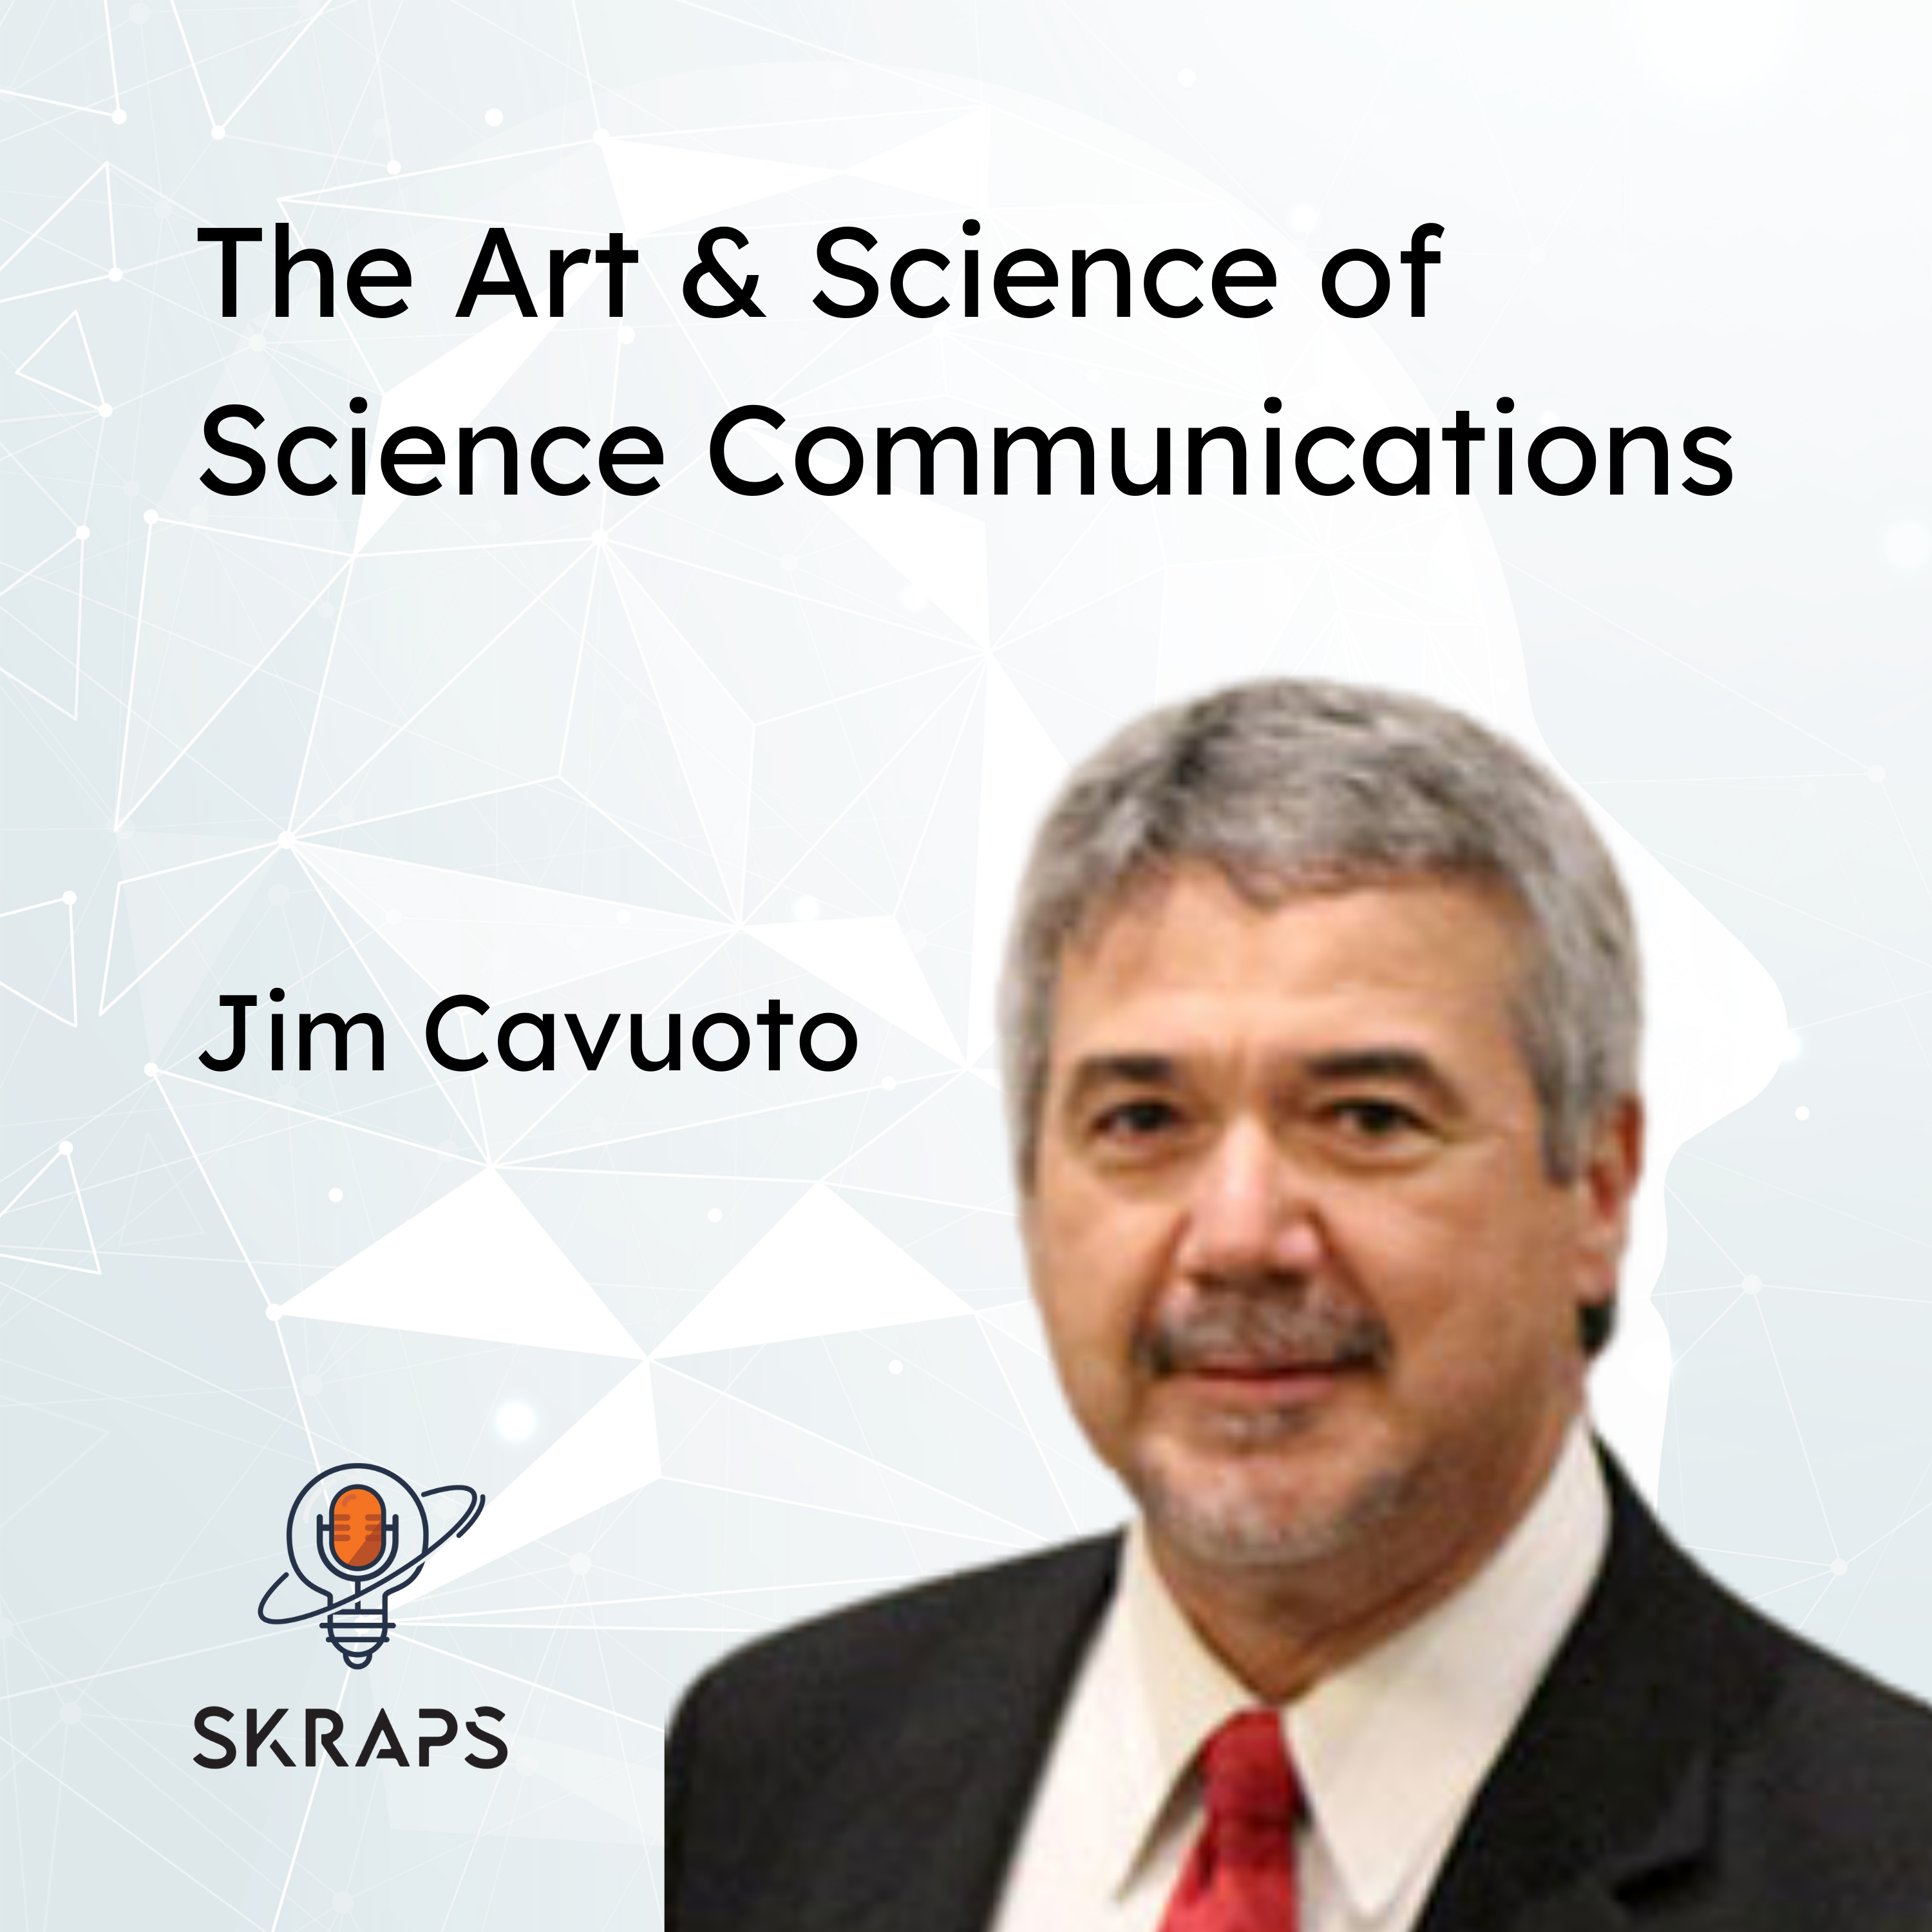 The Art & Science of Science Communications with Jim Cavuoto